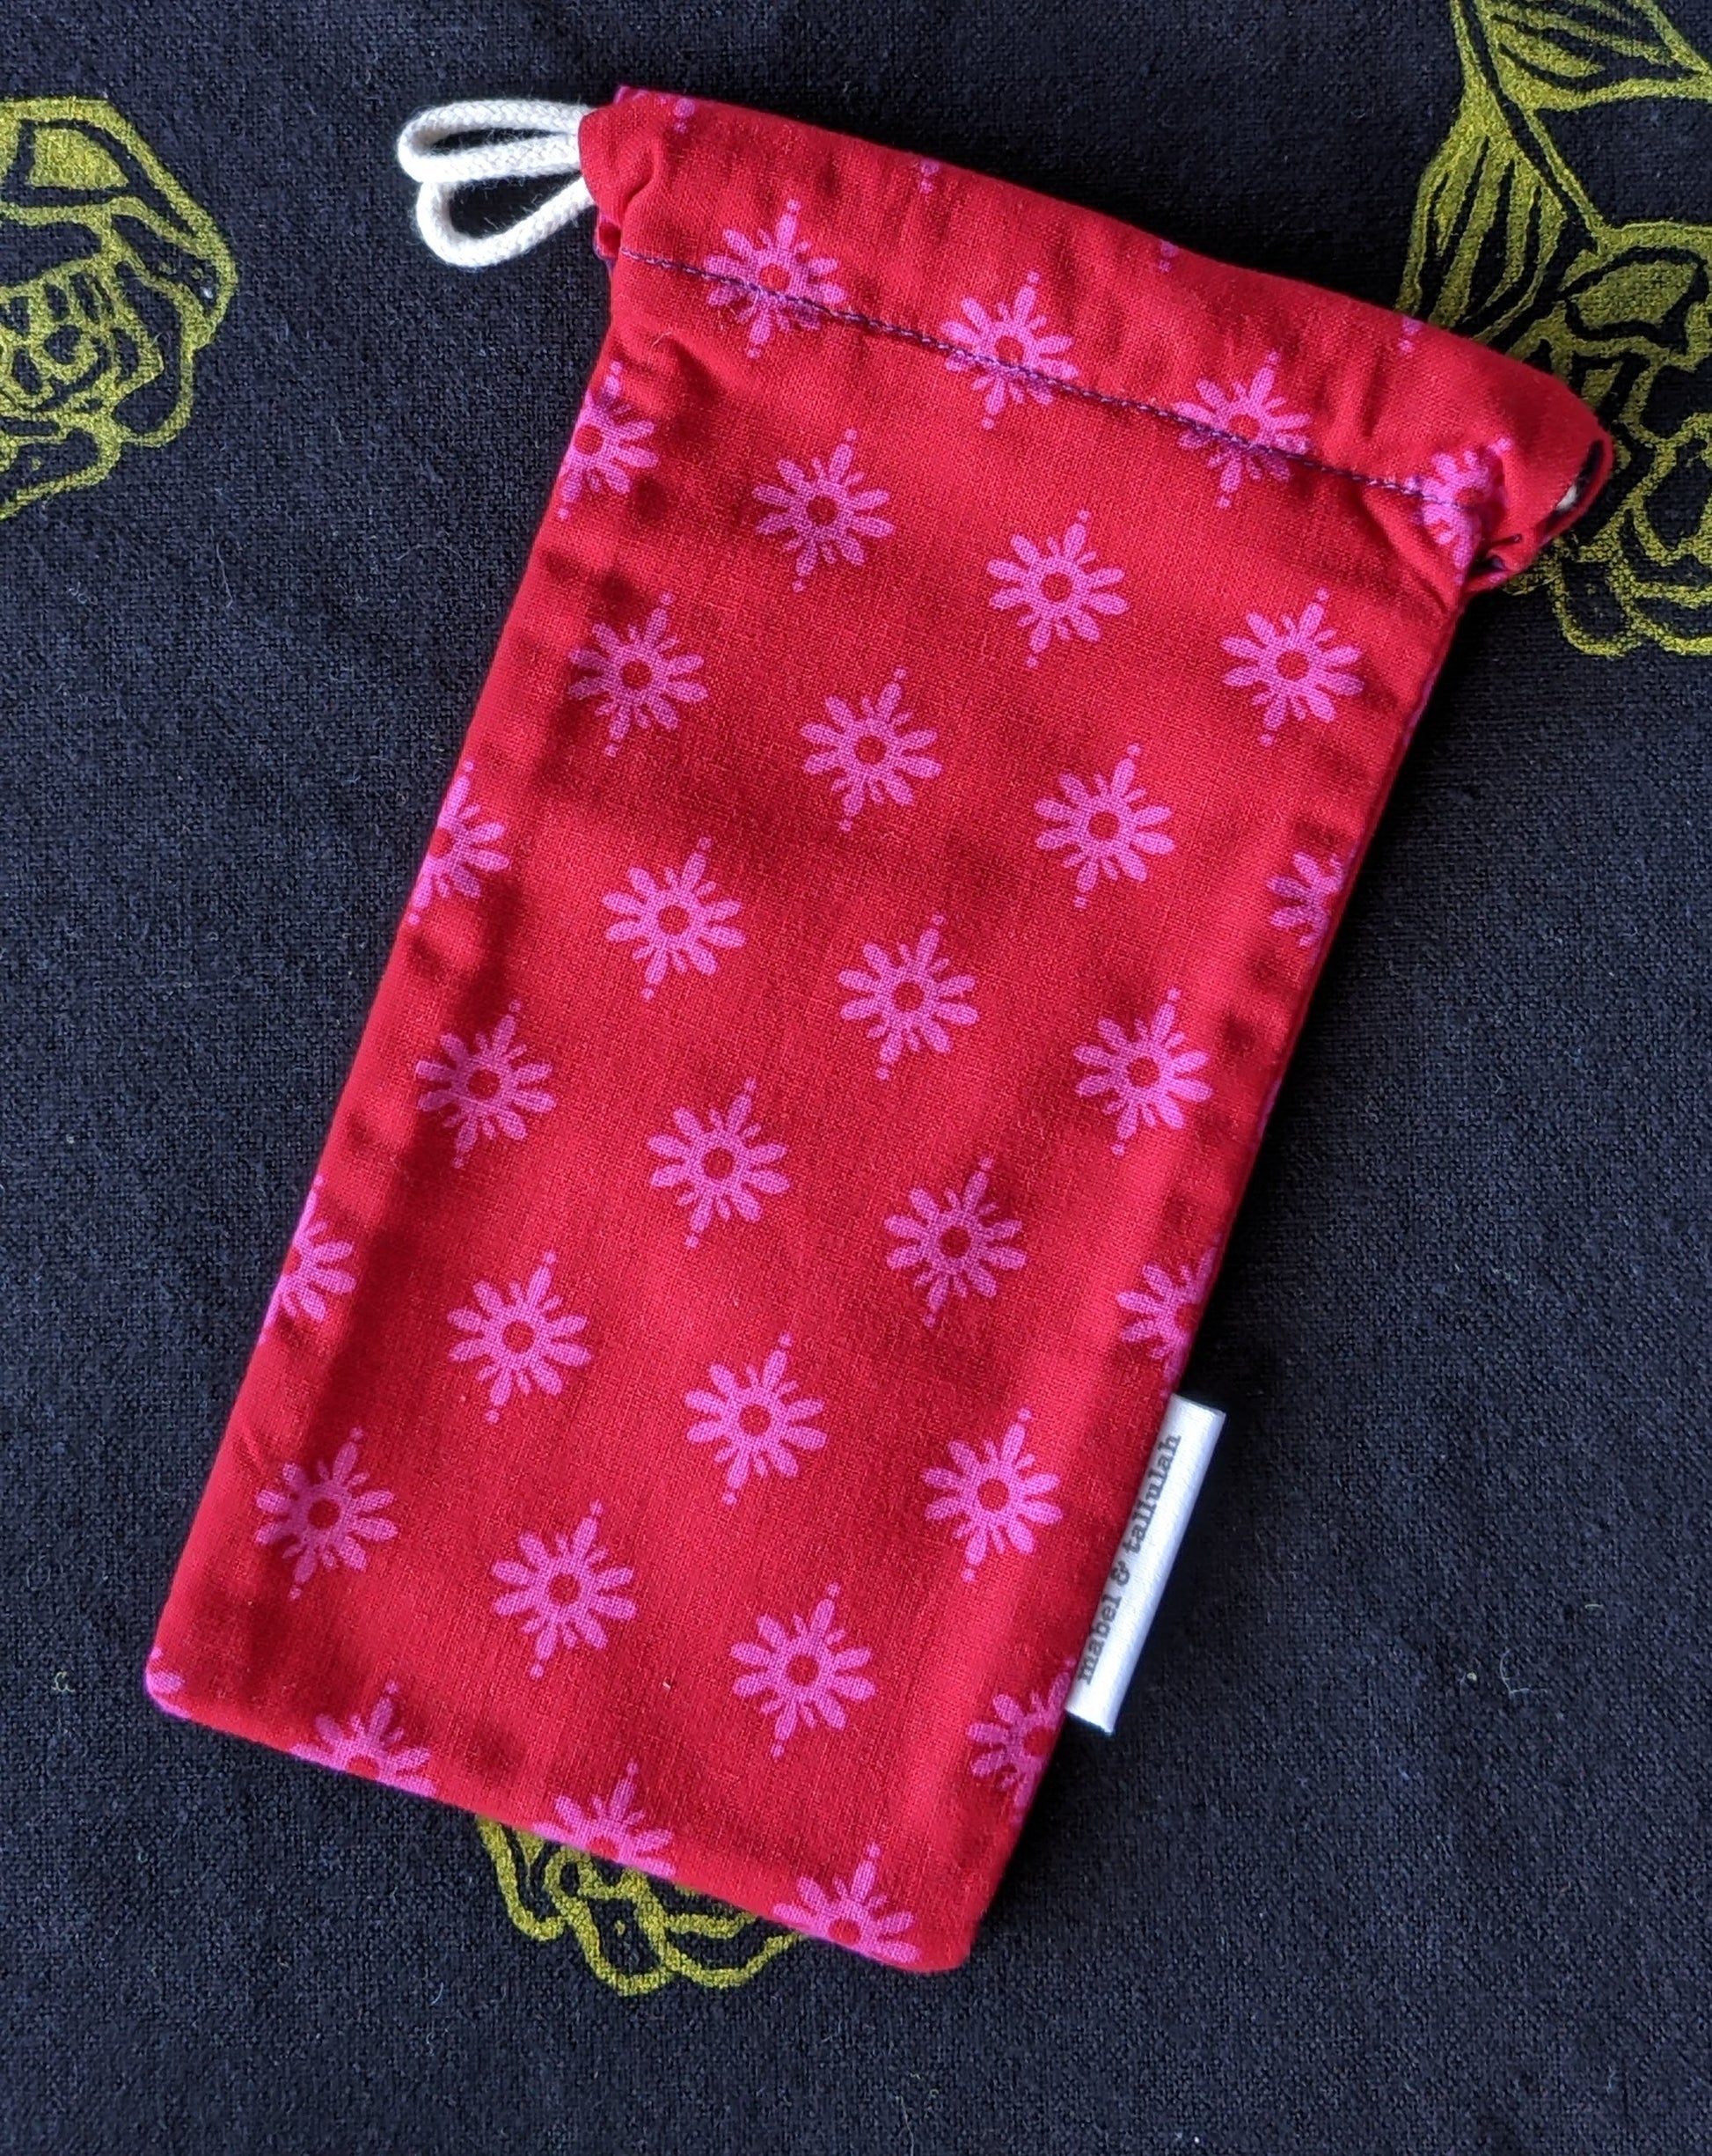 Flower on red sunglasses cover mini pouch by The Arthly Box